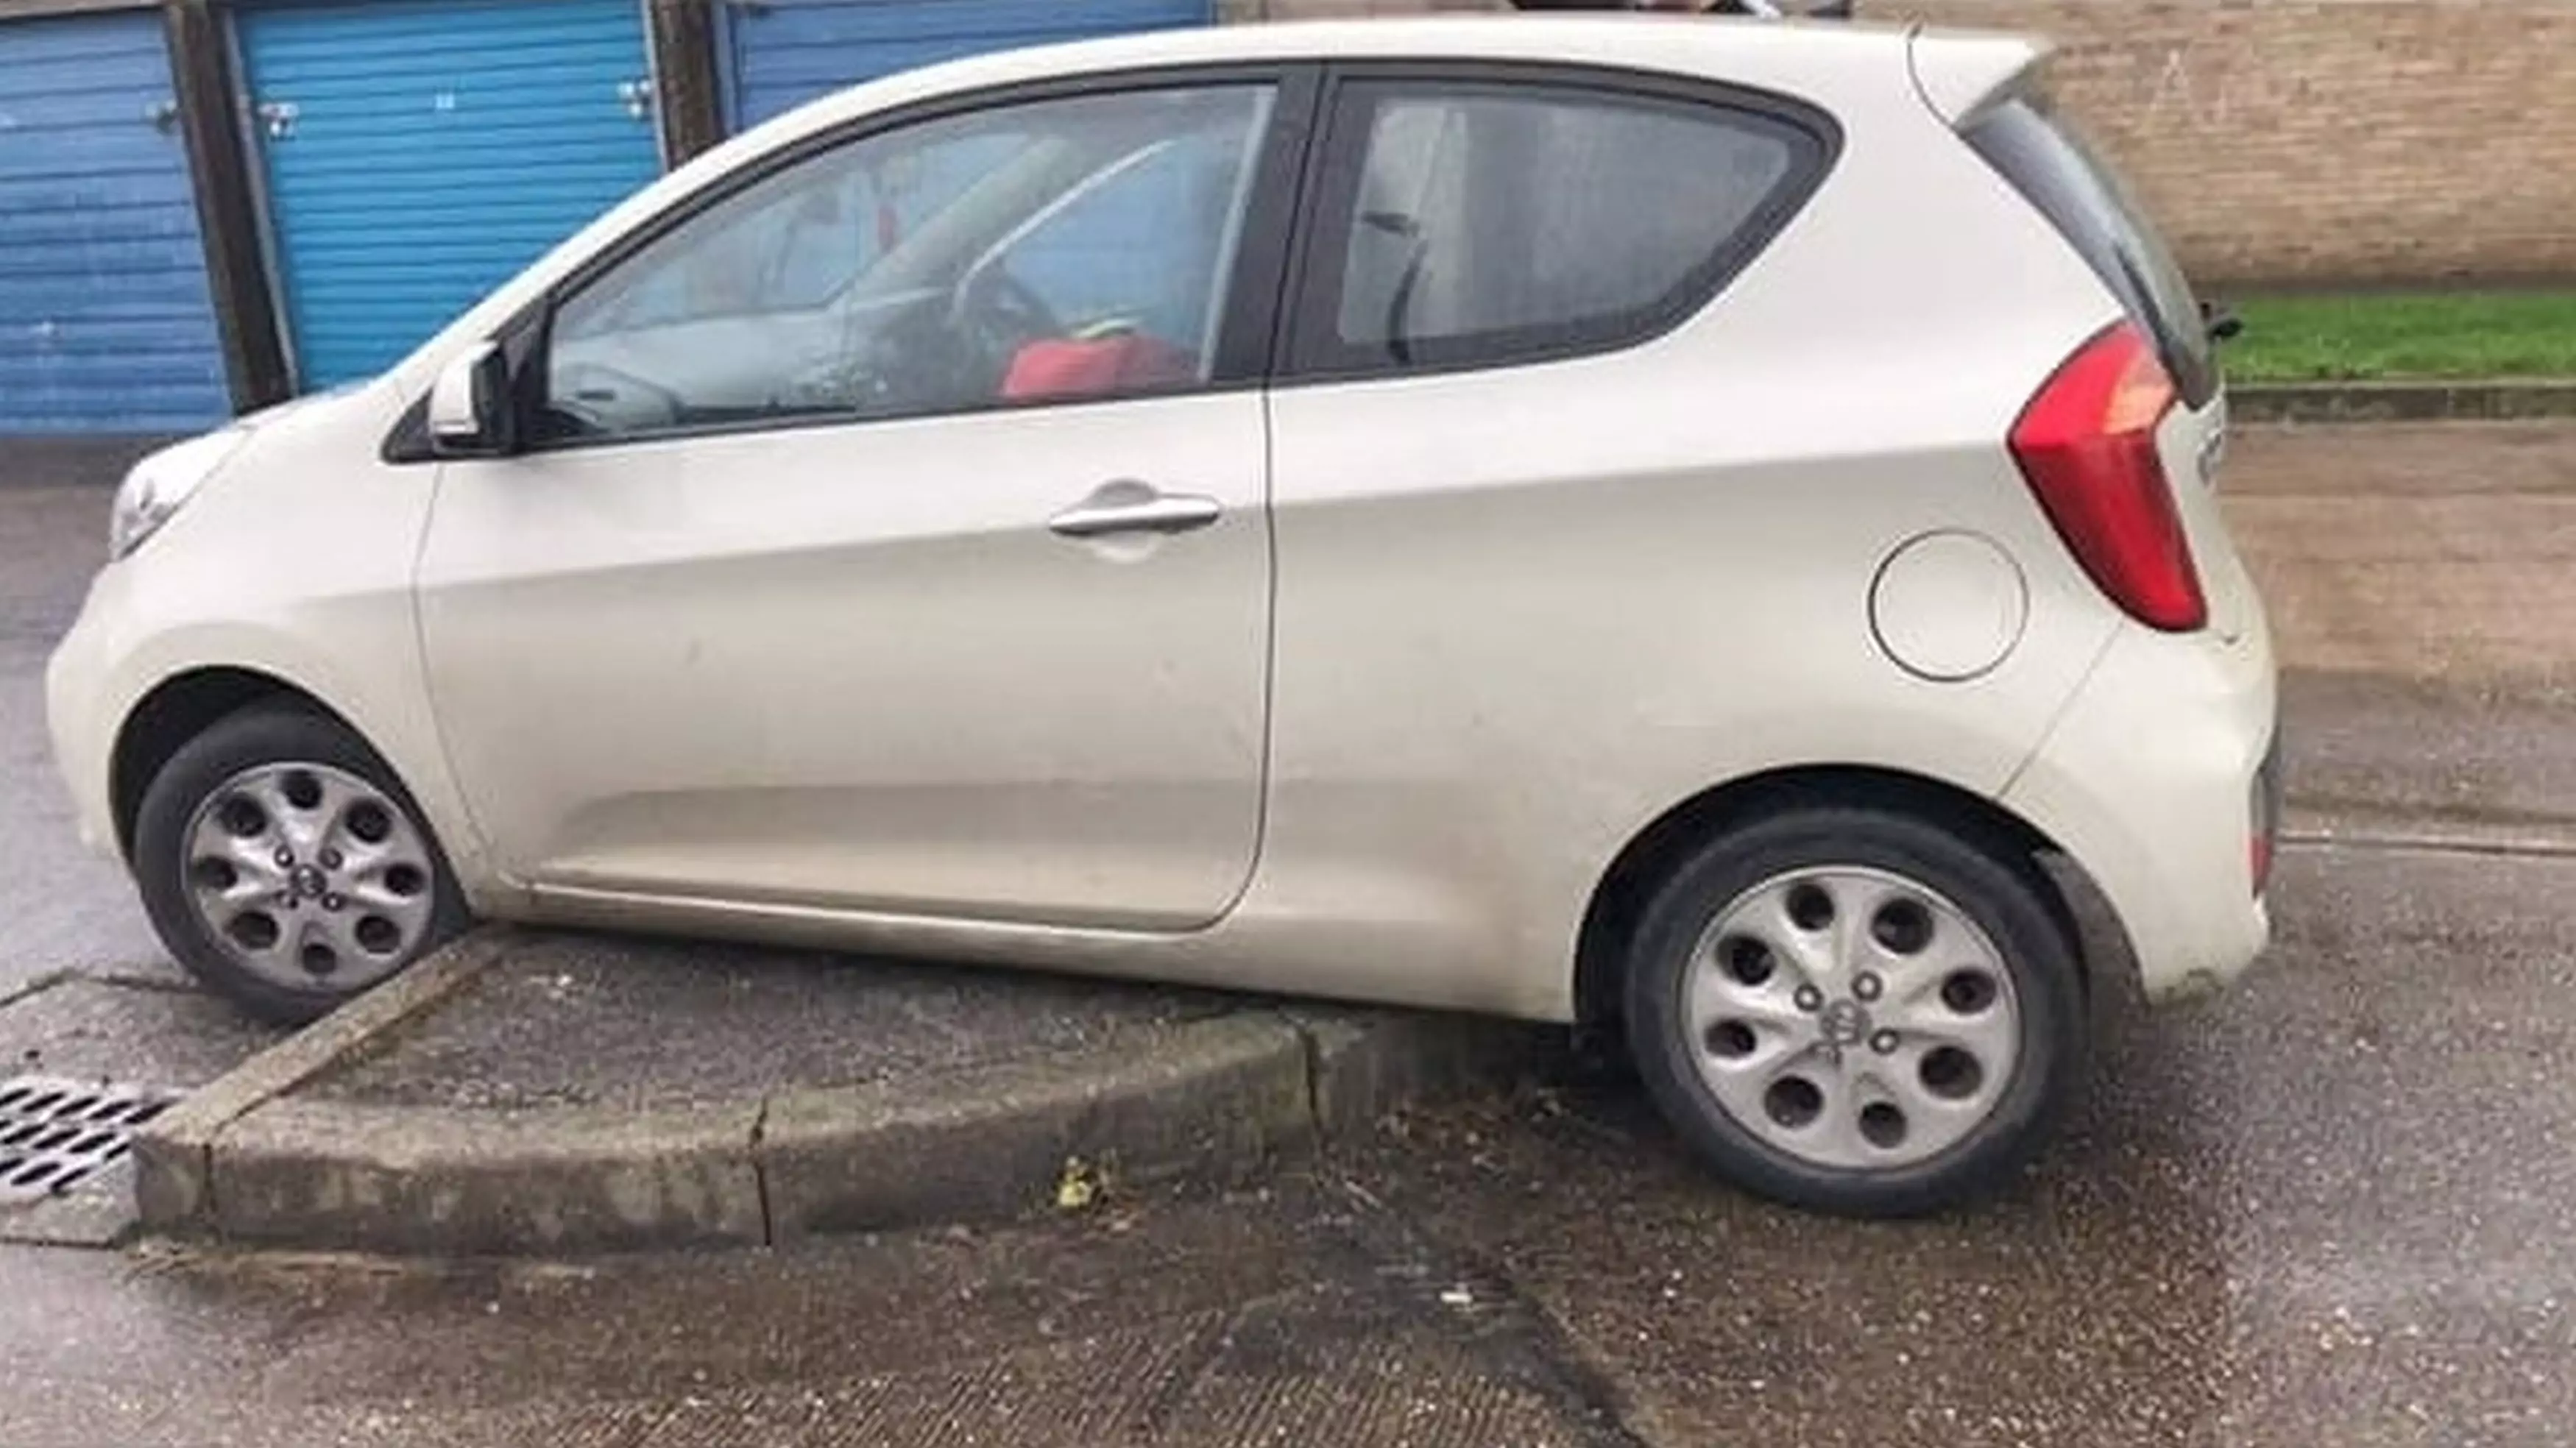 Man Gets His Car Wedged Onto Kerb For An Hour While Delivering Food